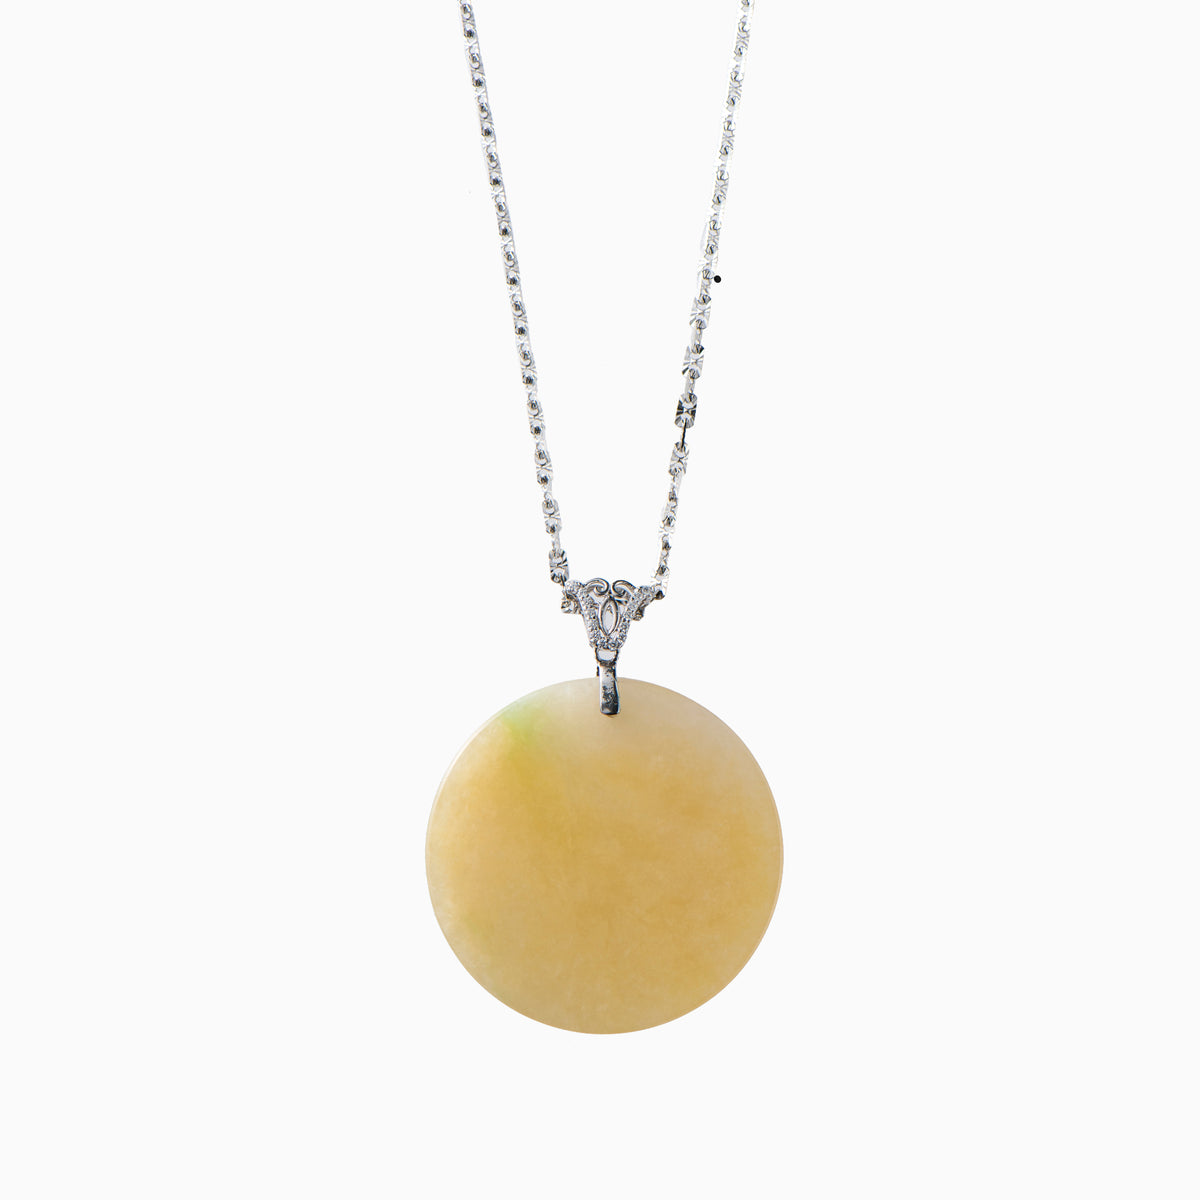 Yellow jade crafted into a circular amulet